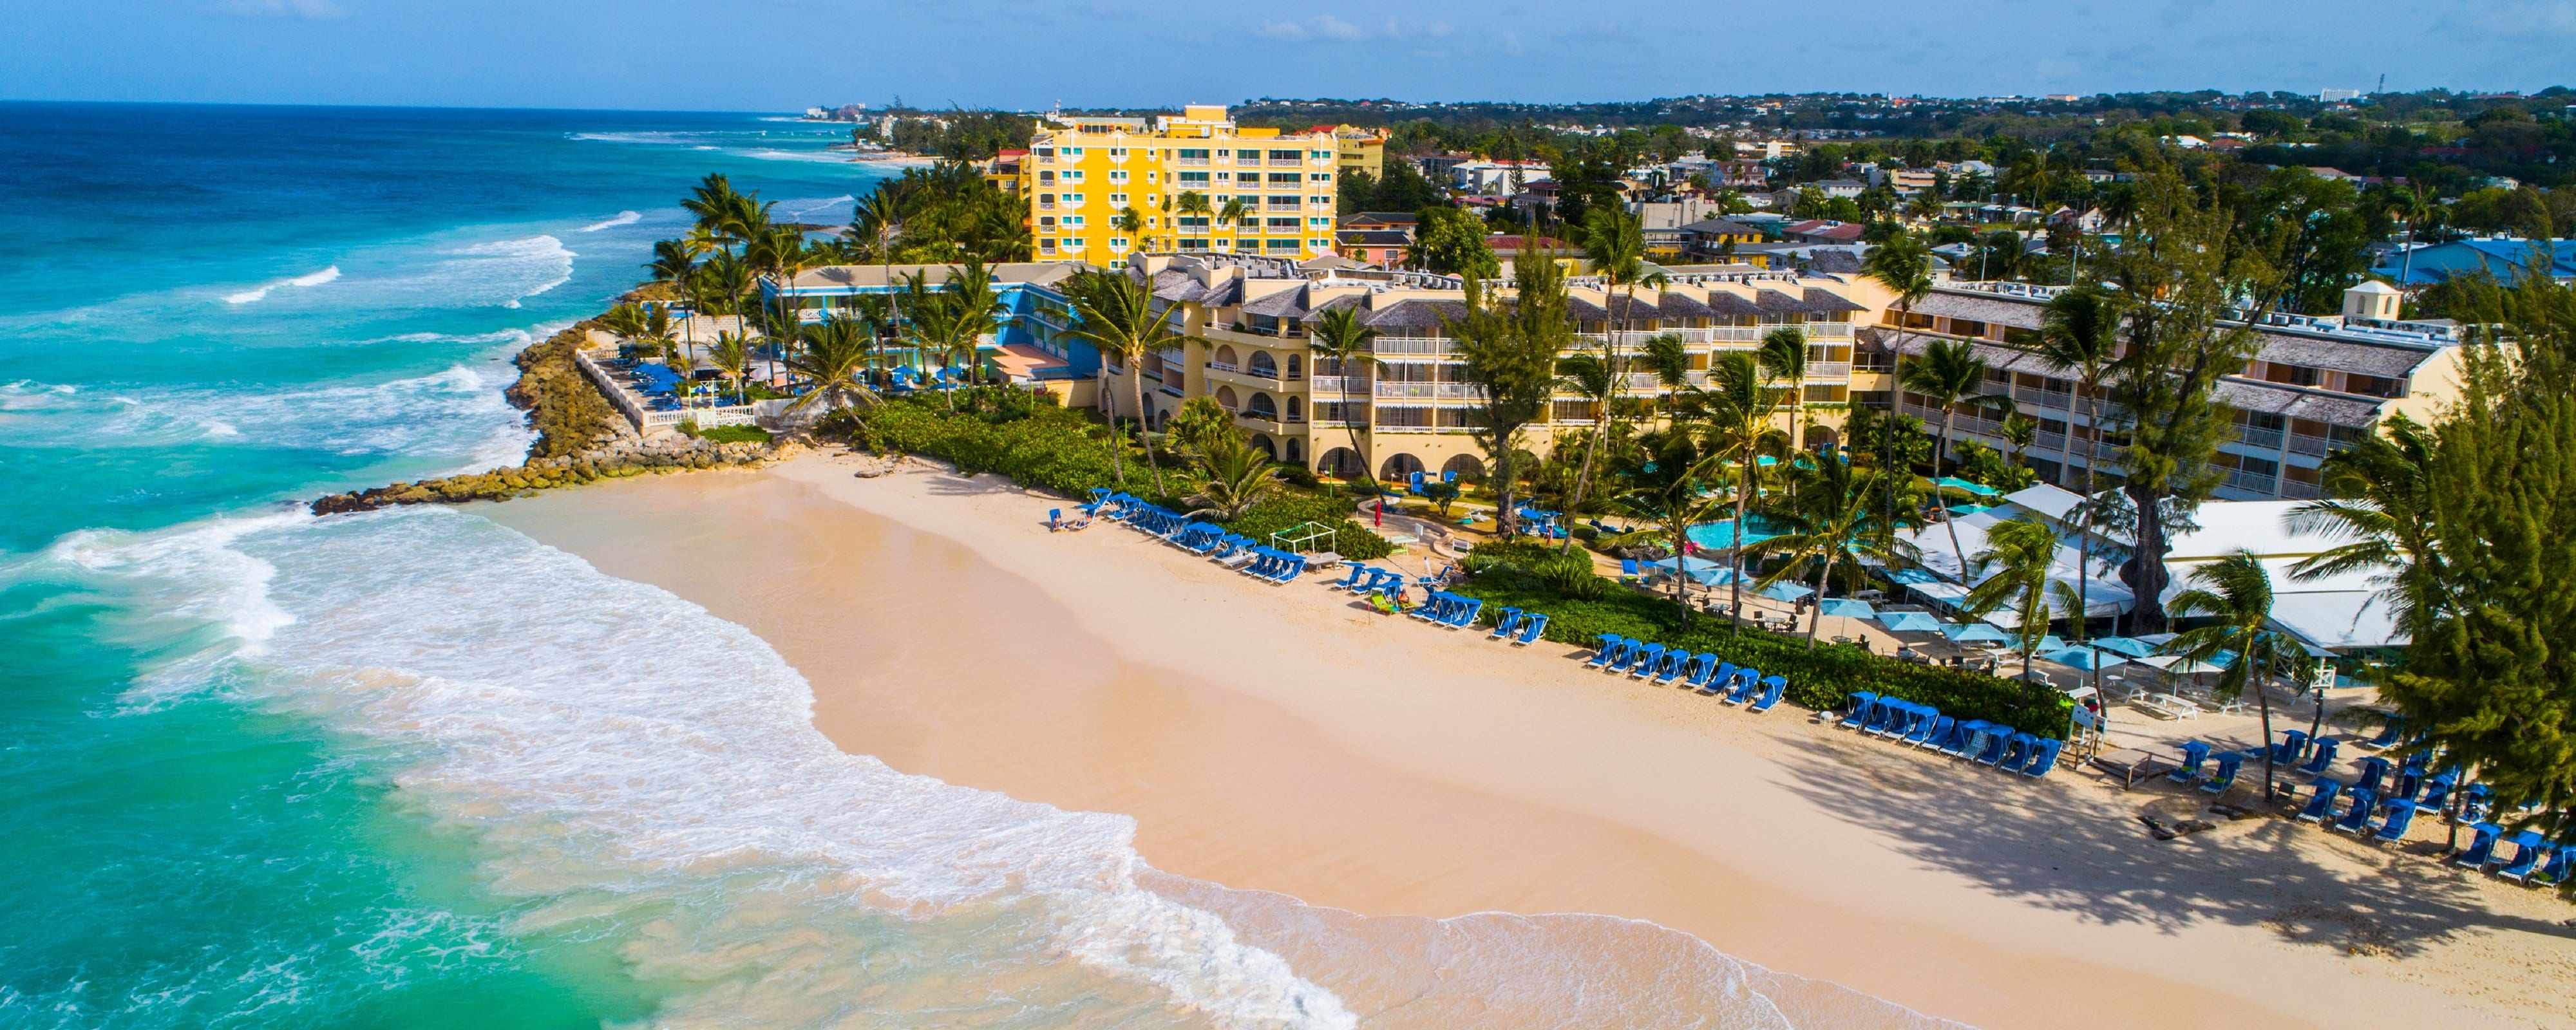 barbados travel packages all inclusive